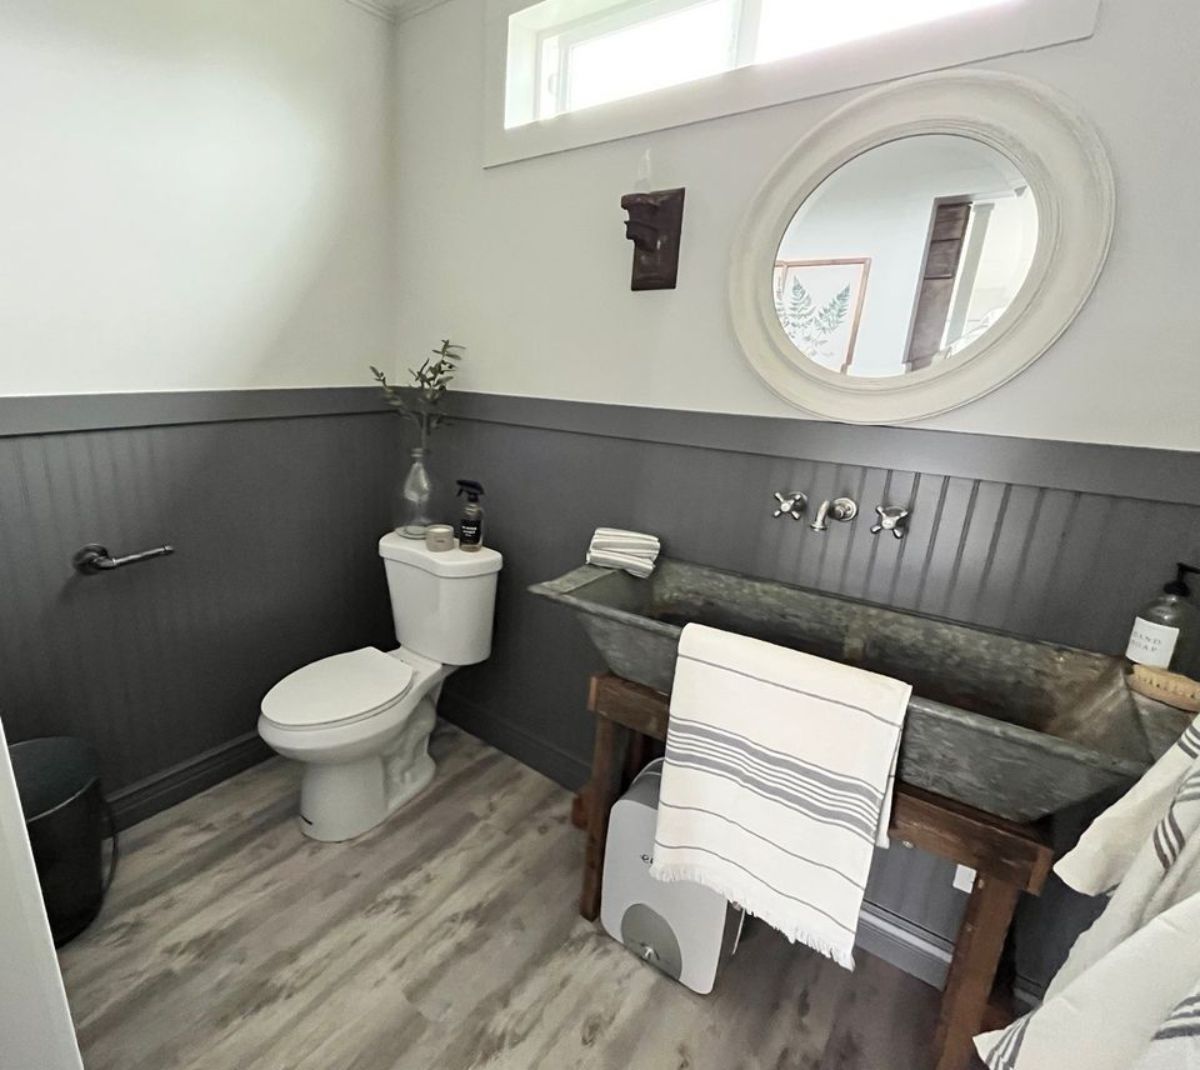 Standard toilet with huge sink and mirror in bathroom of tiny cabin home